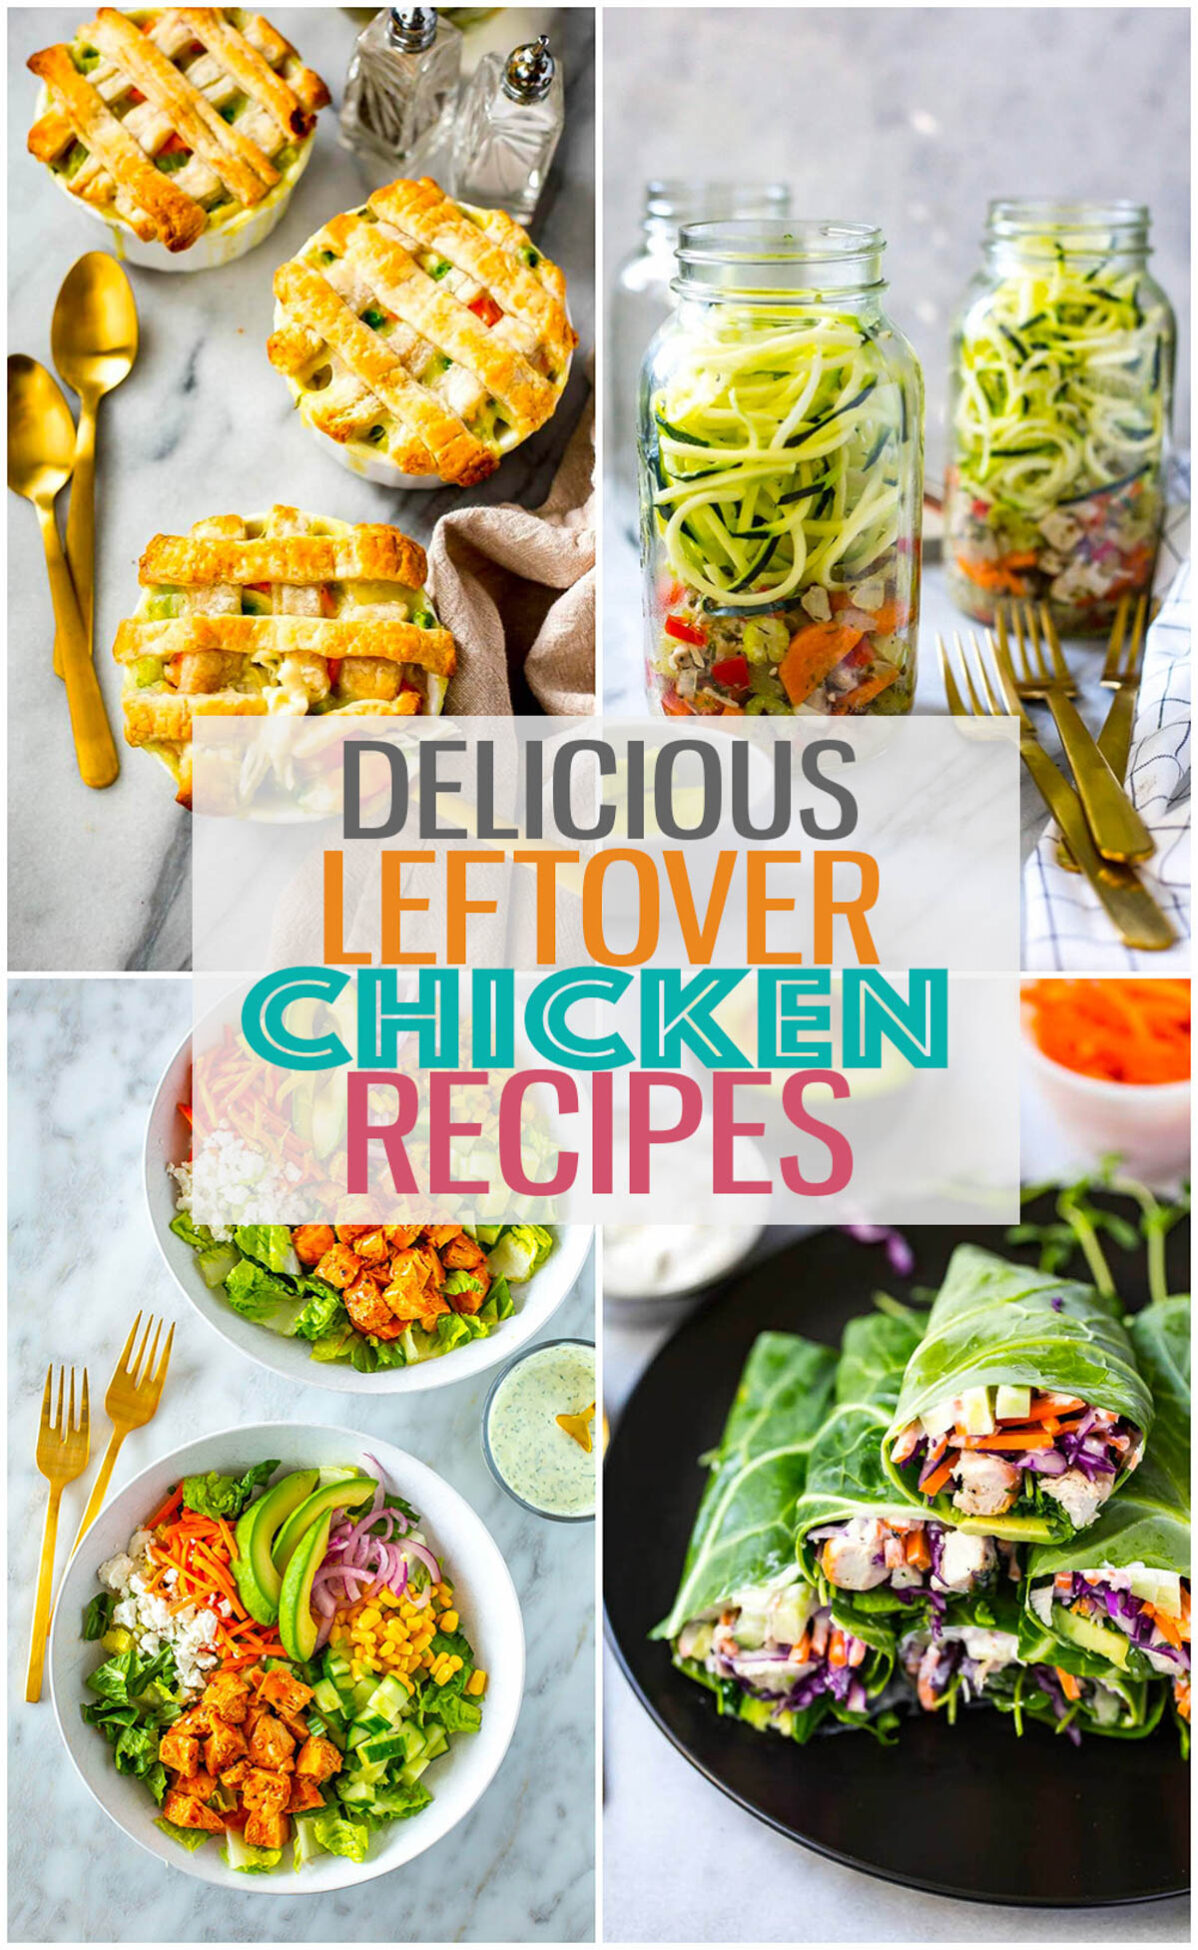 A collage of four different chicken recipes with the text "Delicious Leftover Chicken Recipes" layered over top.